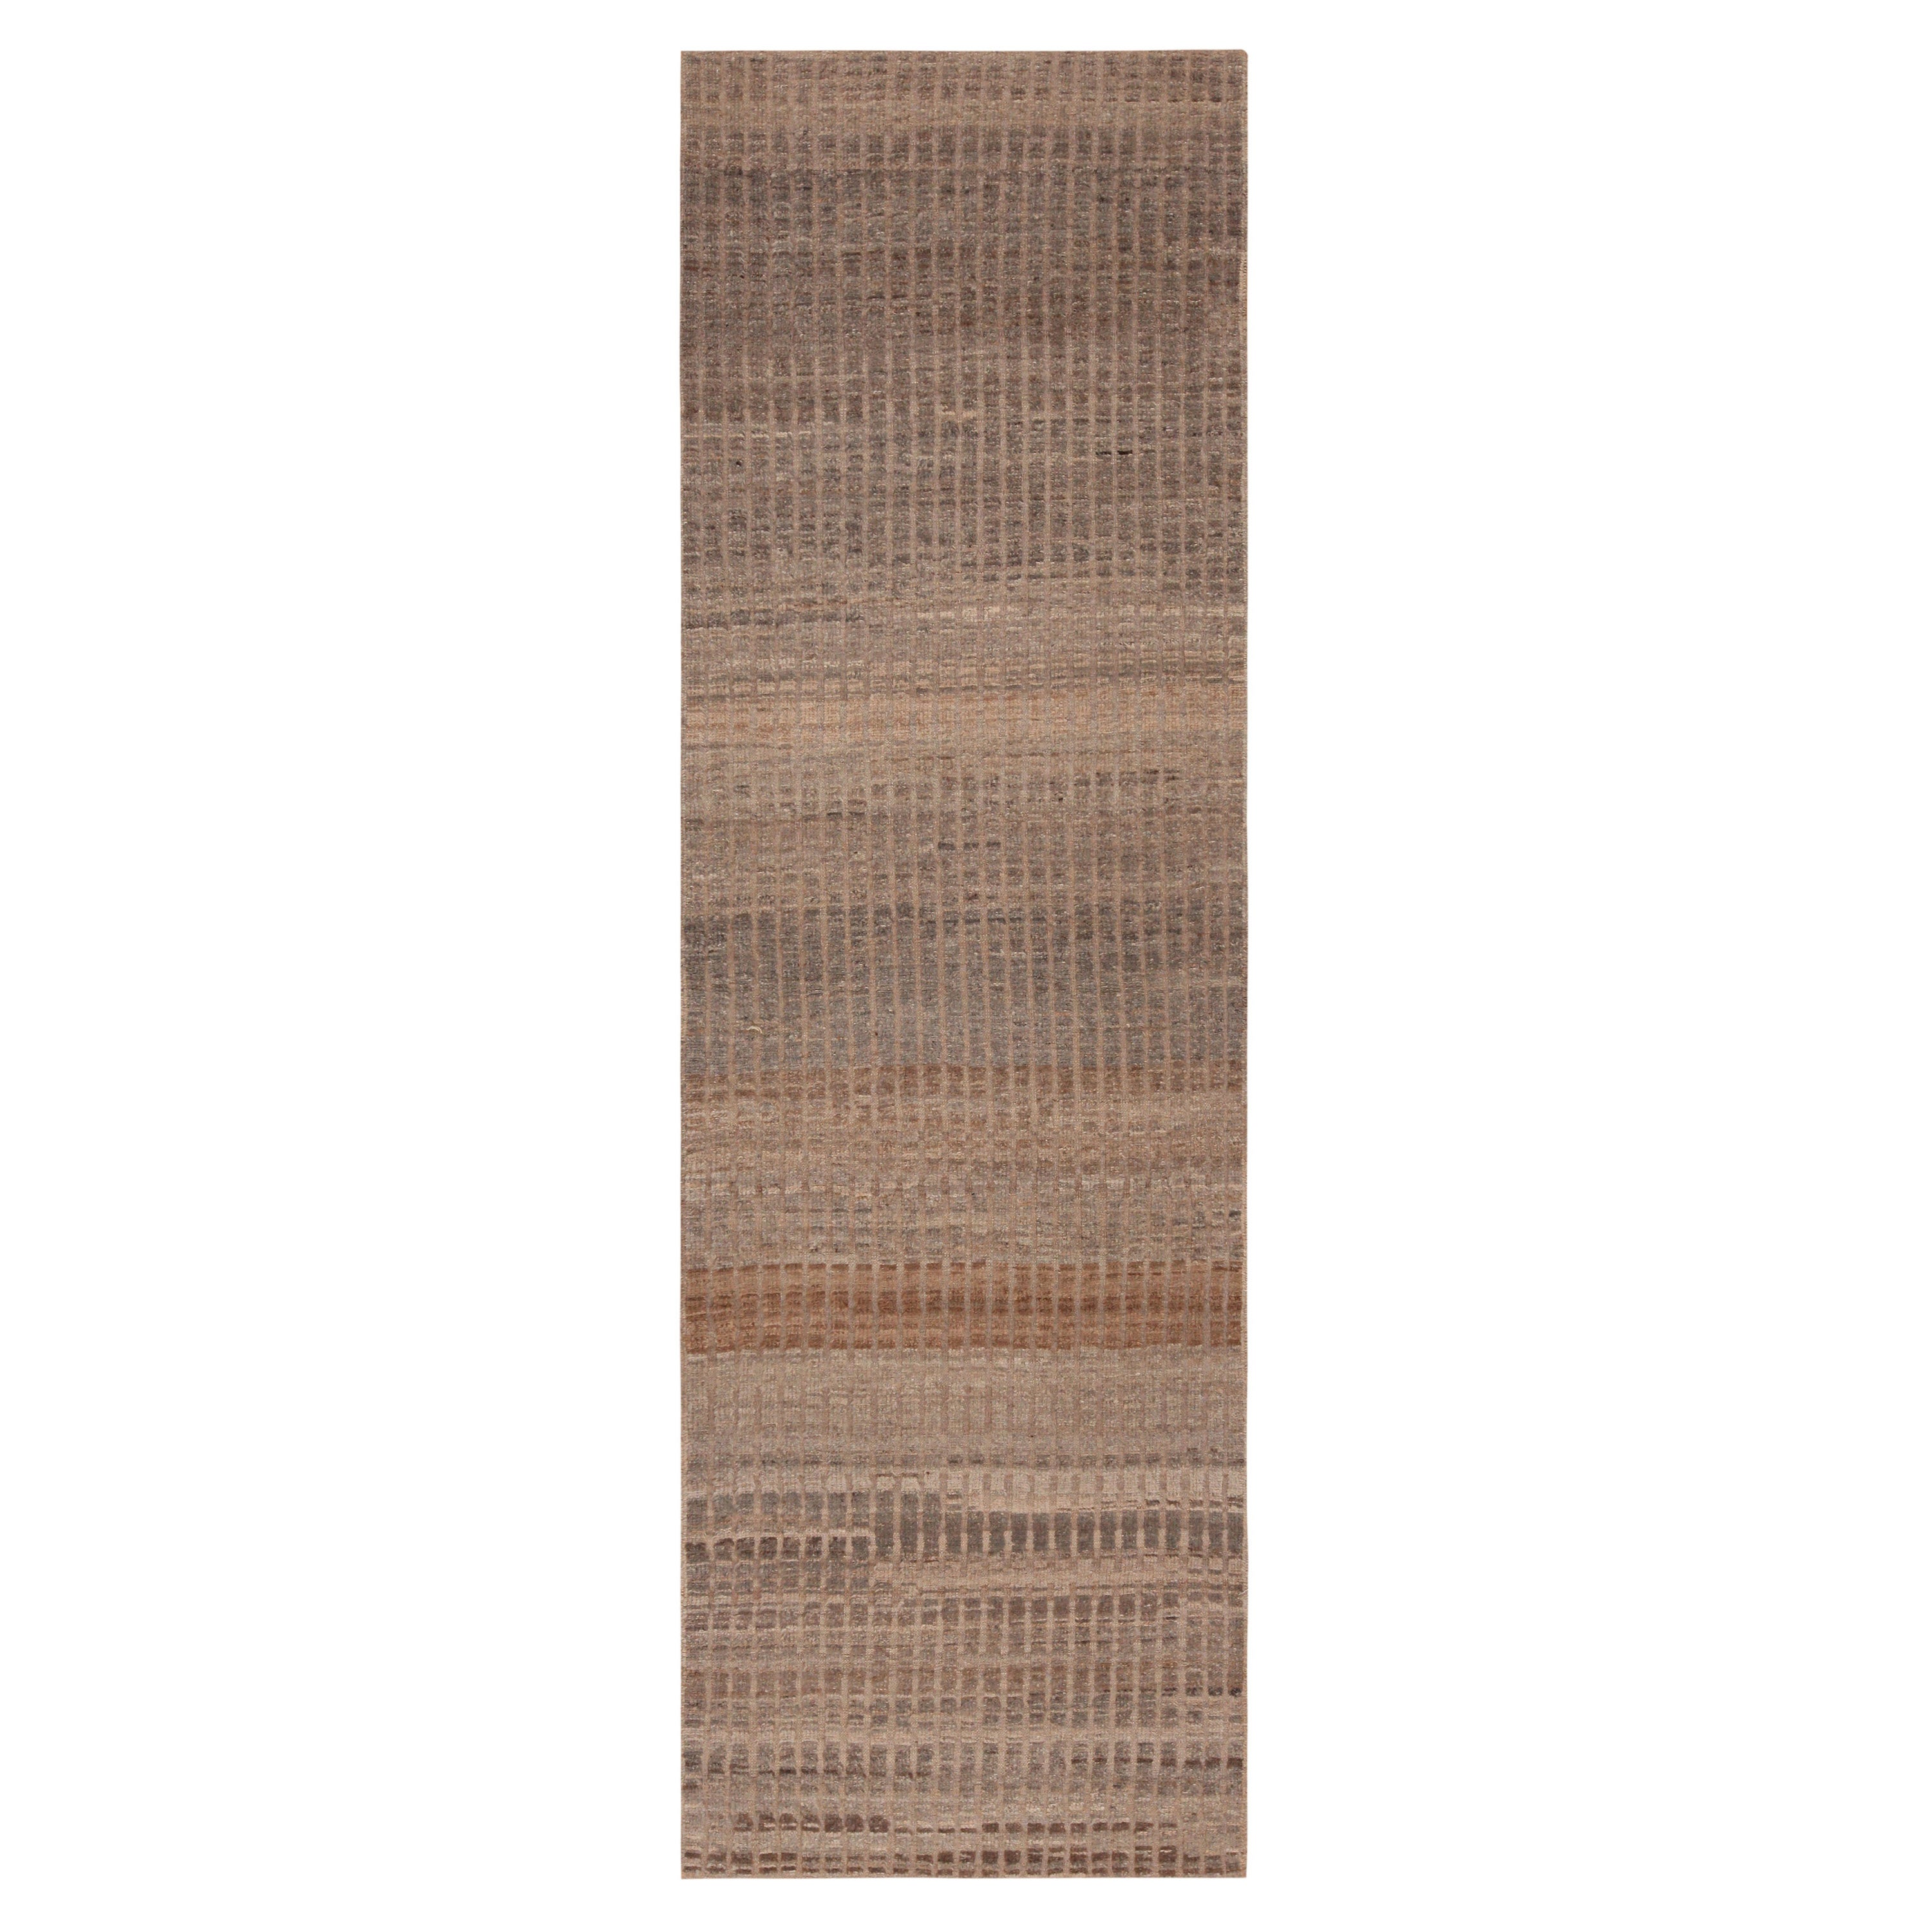 Nazmiyal Collection Earthy Tones Modern Moroccan Rug. 3 ft x 9 ft 8 in  For Sale